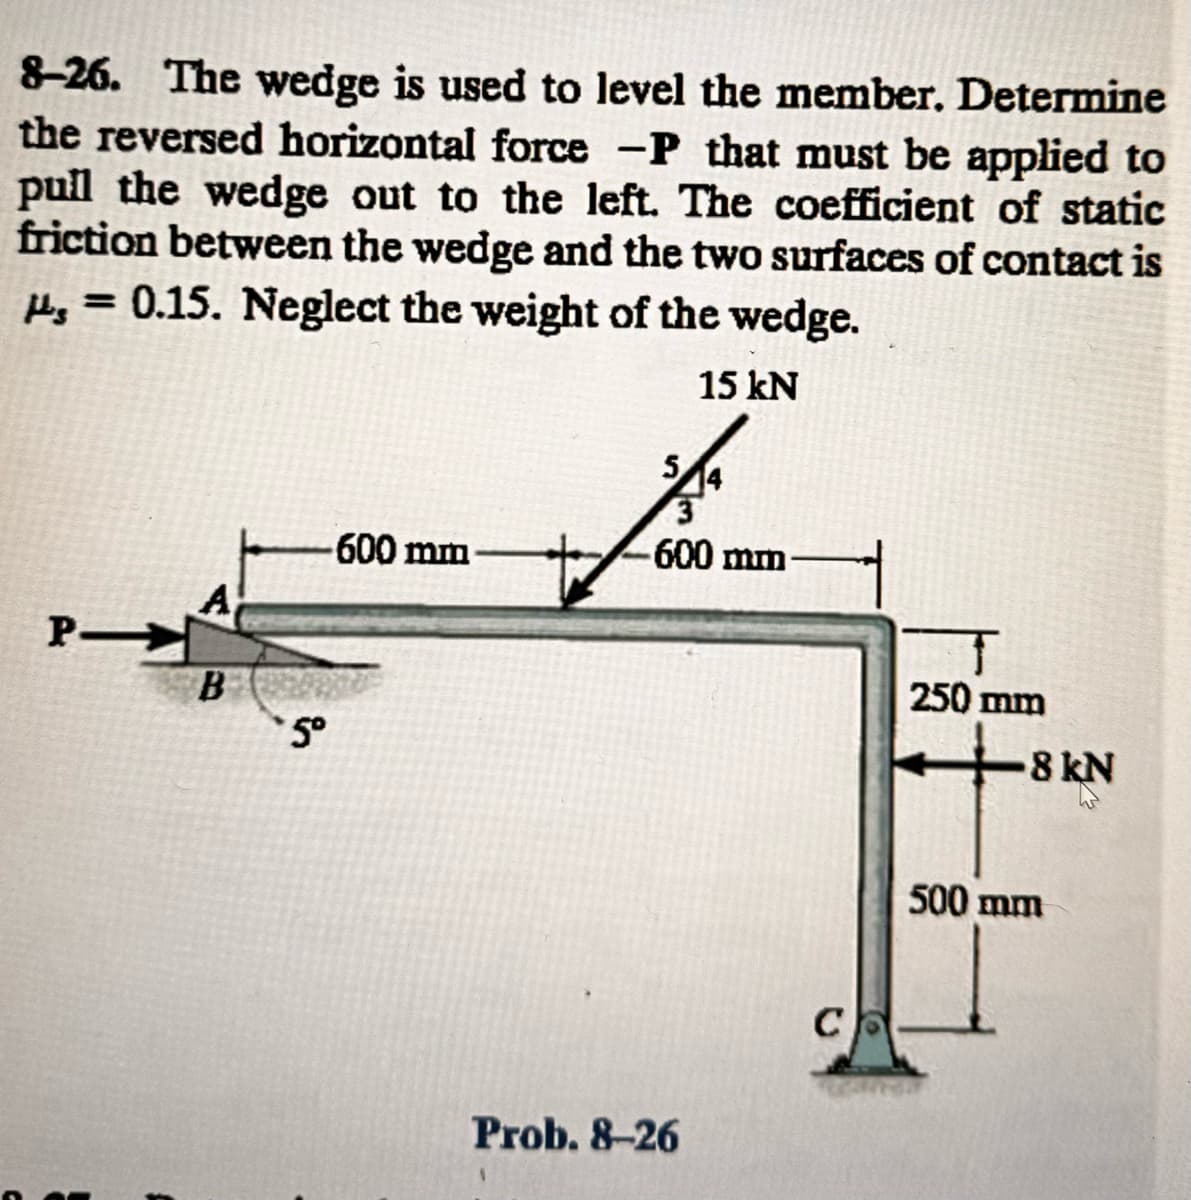 8-26. The wedge is used to level the member. Determine
the reversed horizontal force -P that must be applied to
pull the wedge out to the left. The coefficient of static
friction between the wedge and the two surfaces of contact is
= 0.15. Neglect the weight of the wedge.
15 kN
PI
A
B
5°
600 mm
5
3
600 mm
Prob. 8-26
C
250 mm
-8 kN
500 mm